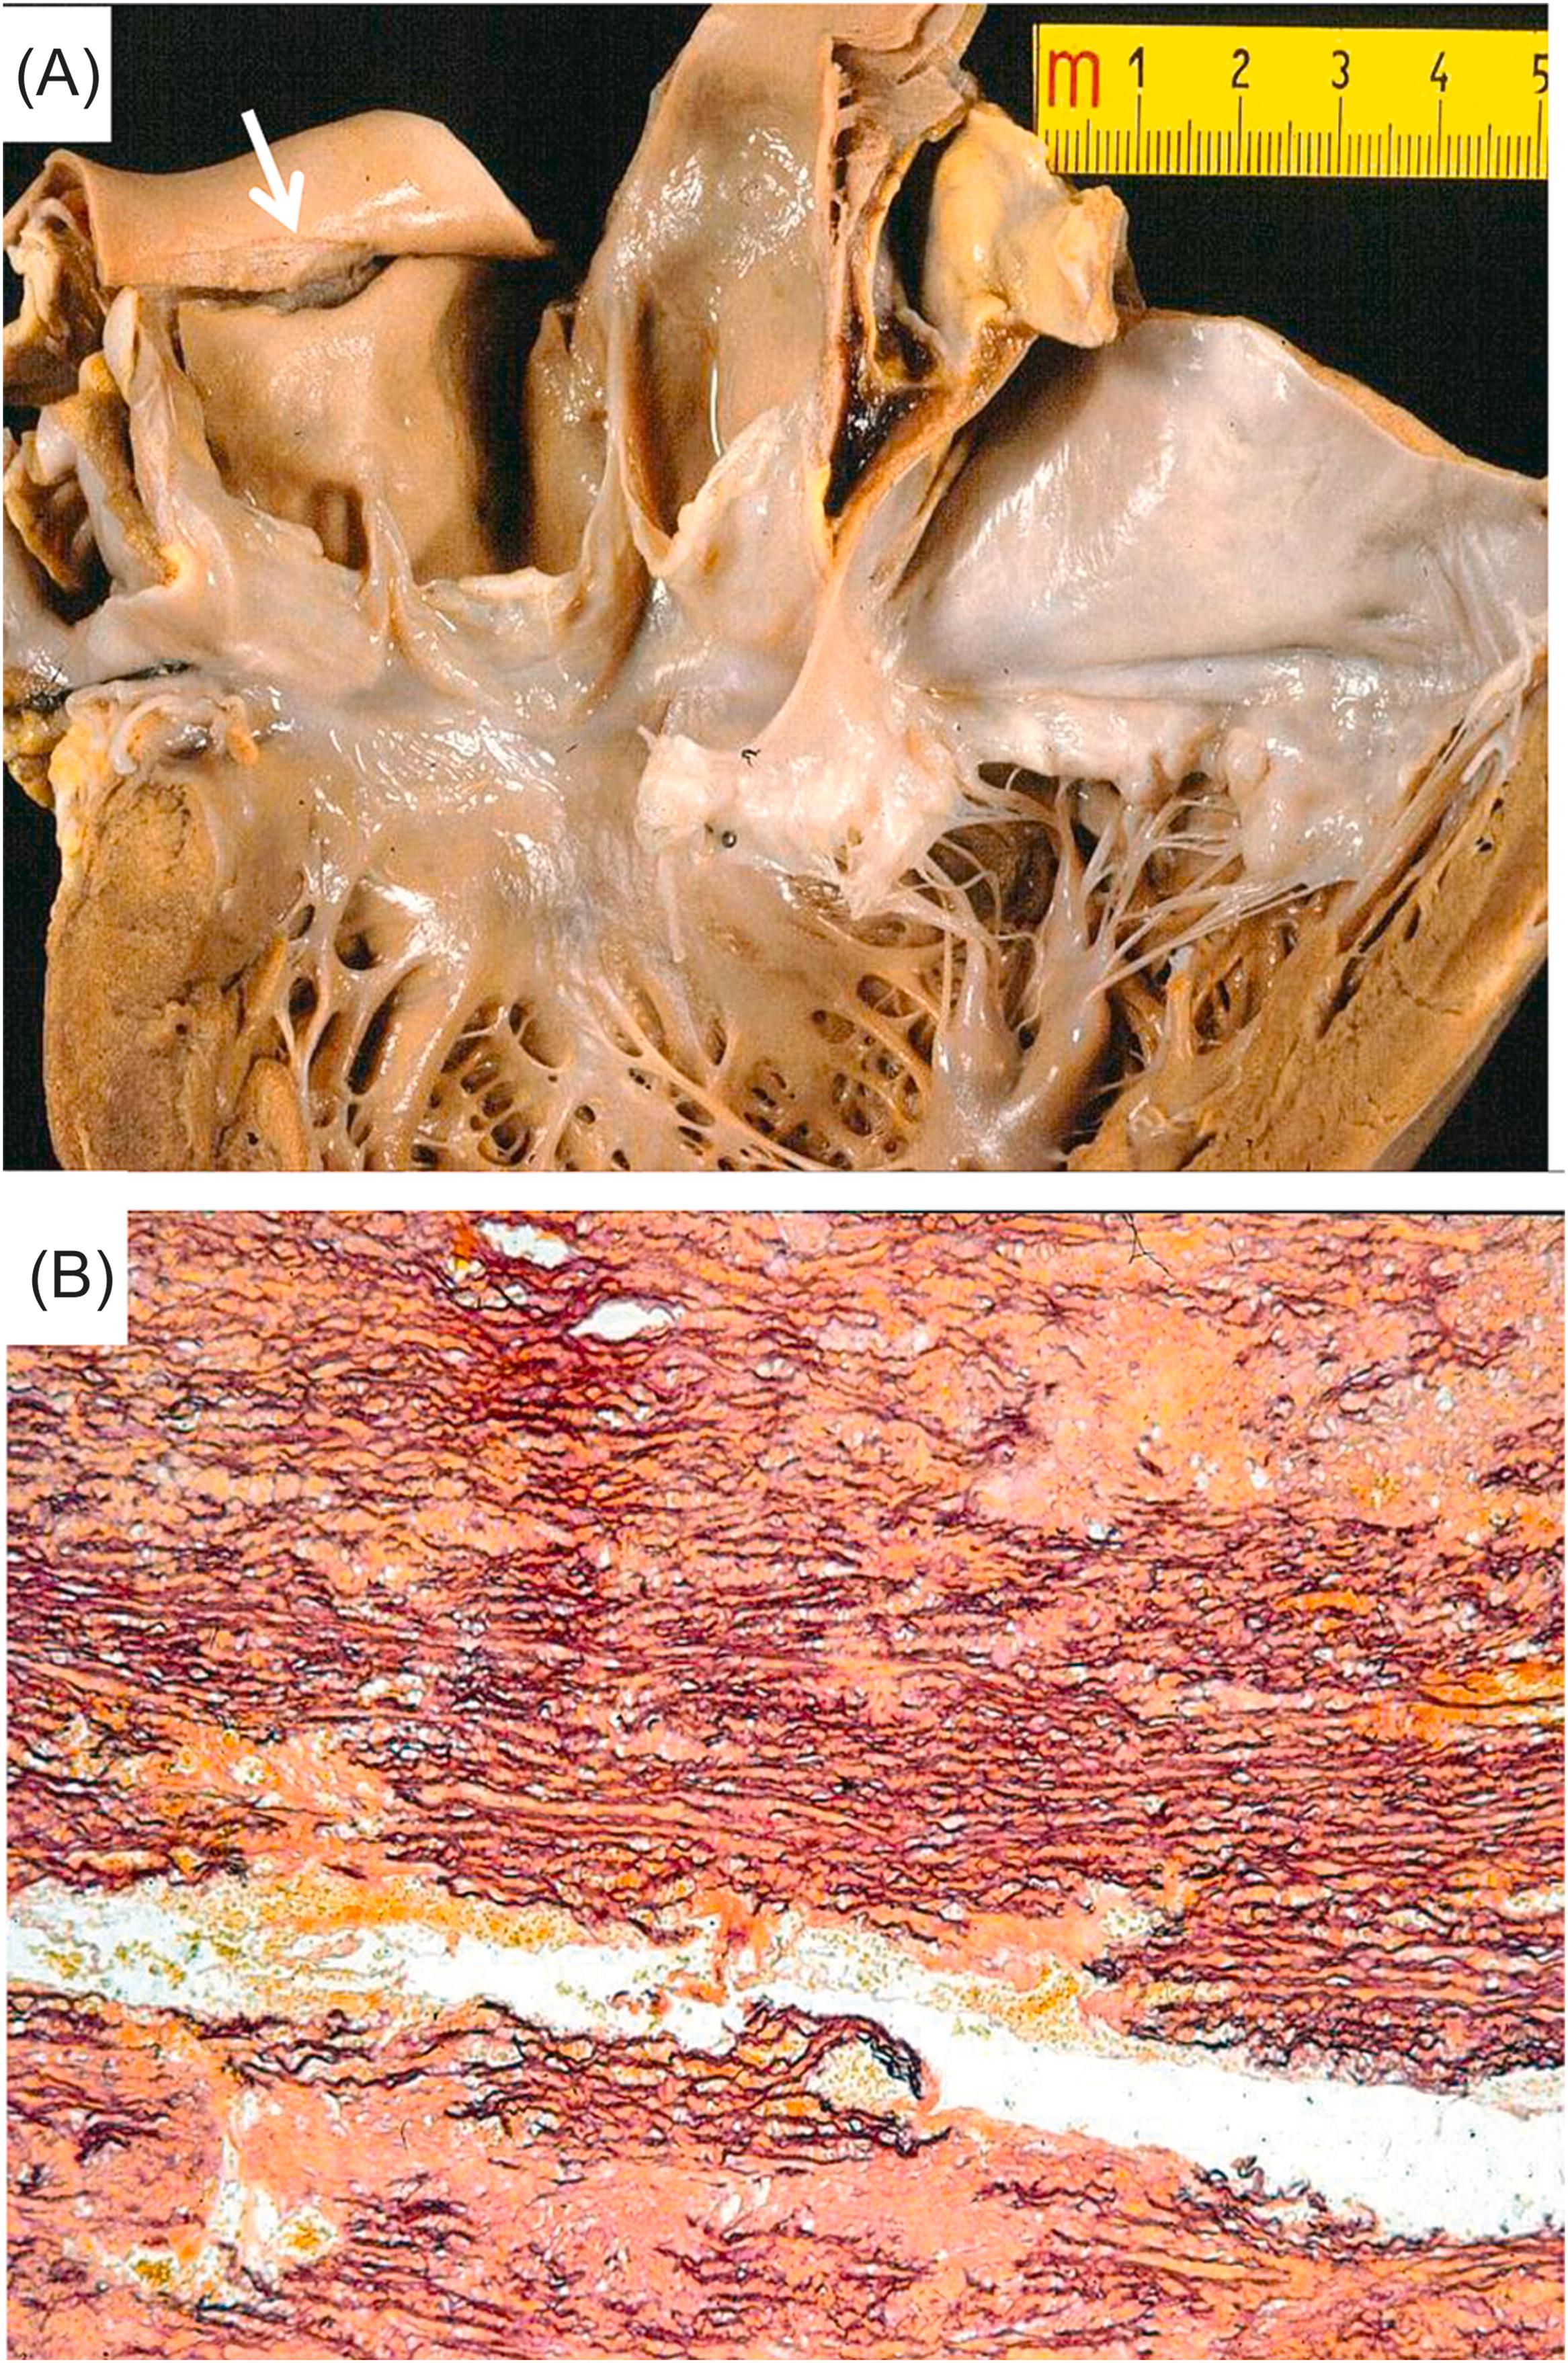 Figure 11.9, Marfan syndrome with aortic dissection, and mechanical sudden cardiac death in a 31-year-old man. (A) View of the left side of the heart and the ascending aorta with annuloaortic ectasia and intimal tear ( arrow ) located 2 cm above the sinotubular junction. Note mitral valve prolapse. (B) Histology of the aortic wall showing dissection of the tunica media, affected by severe elastic disruption (Weigert–van Gieson).